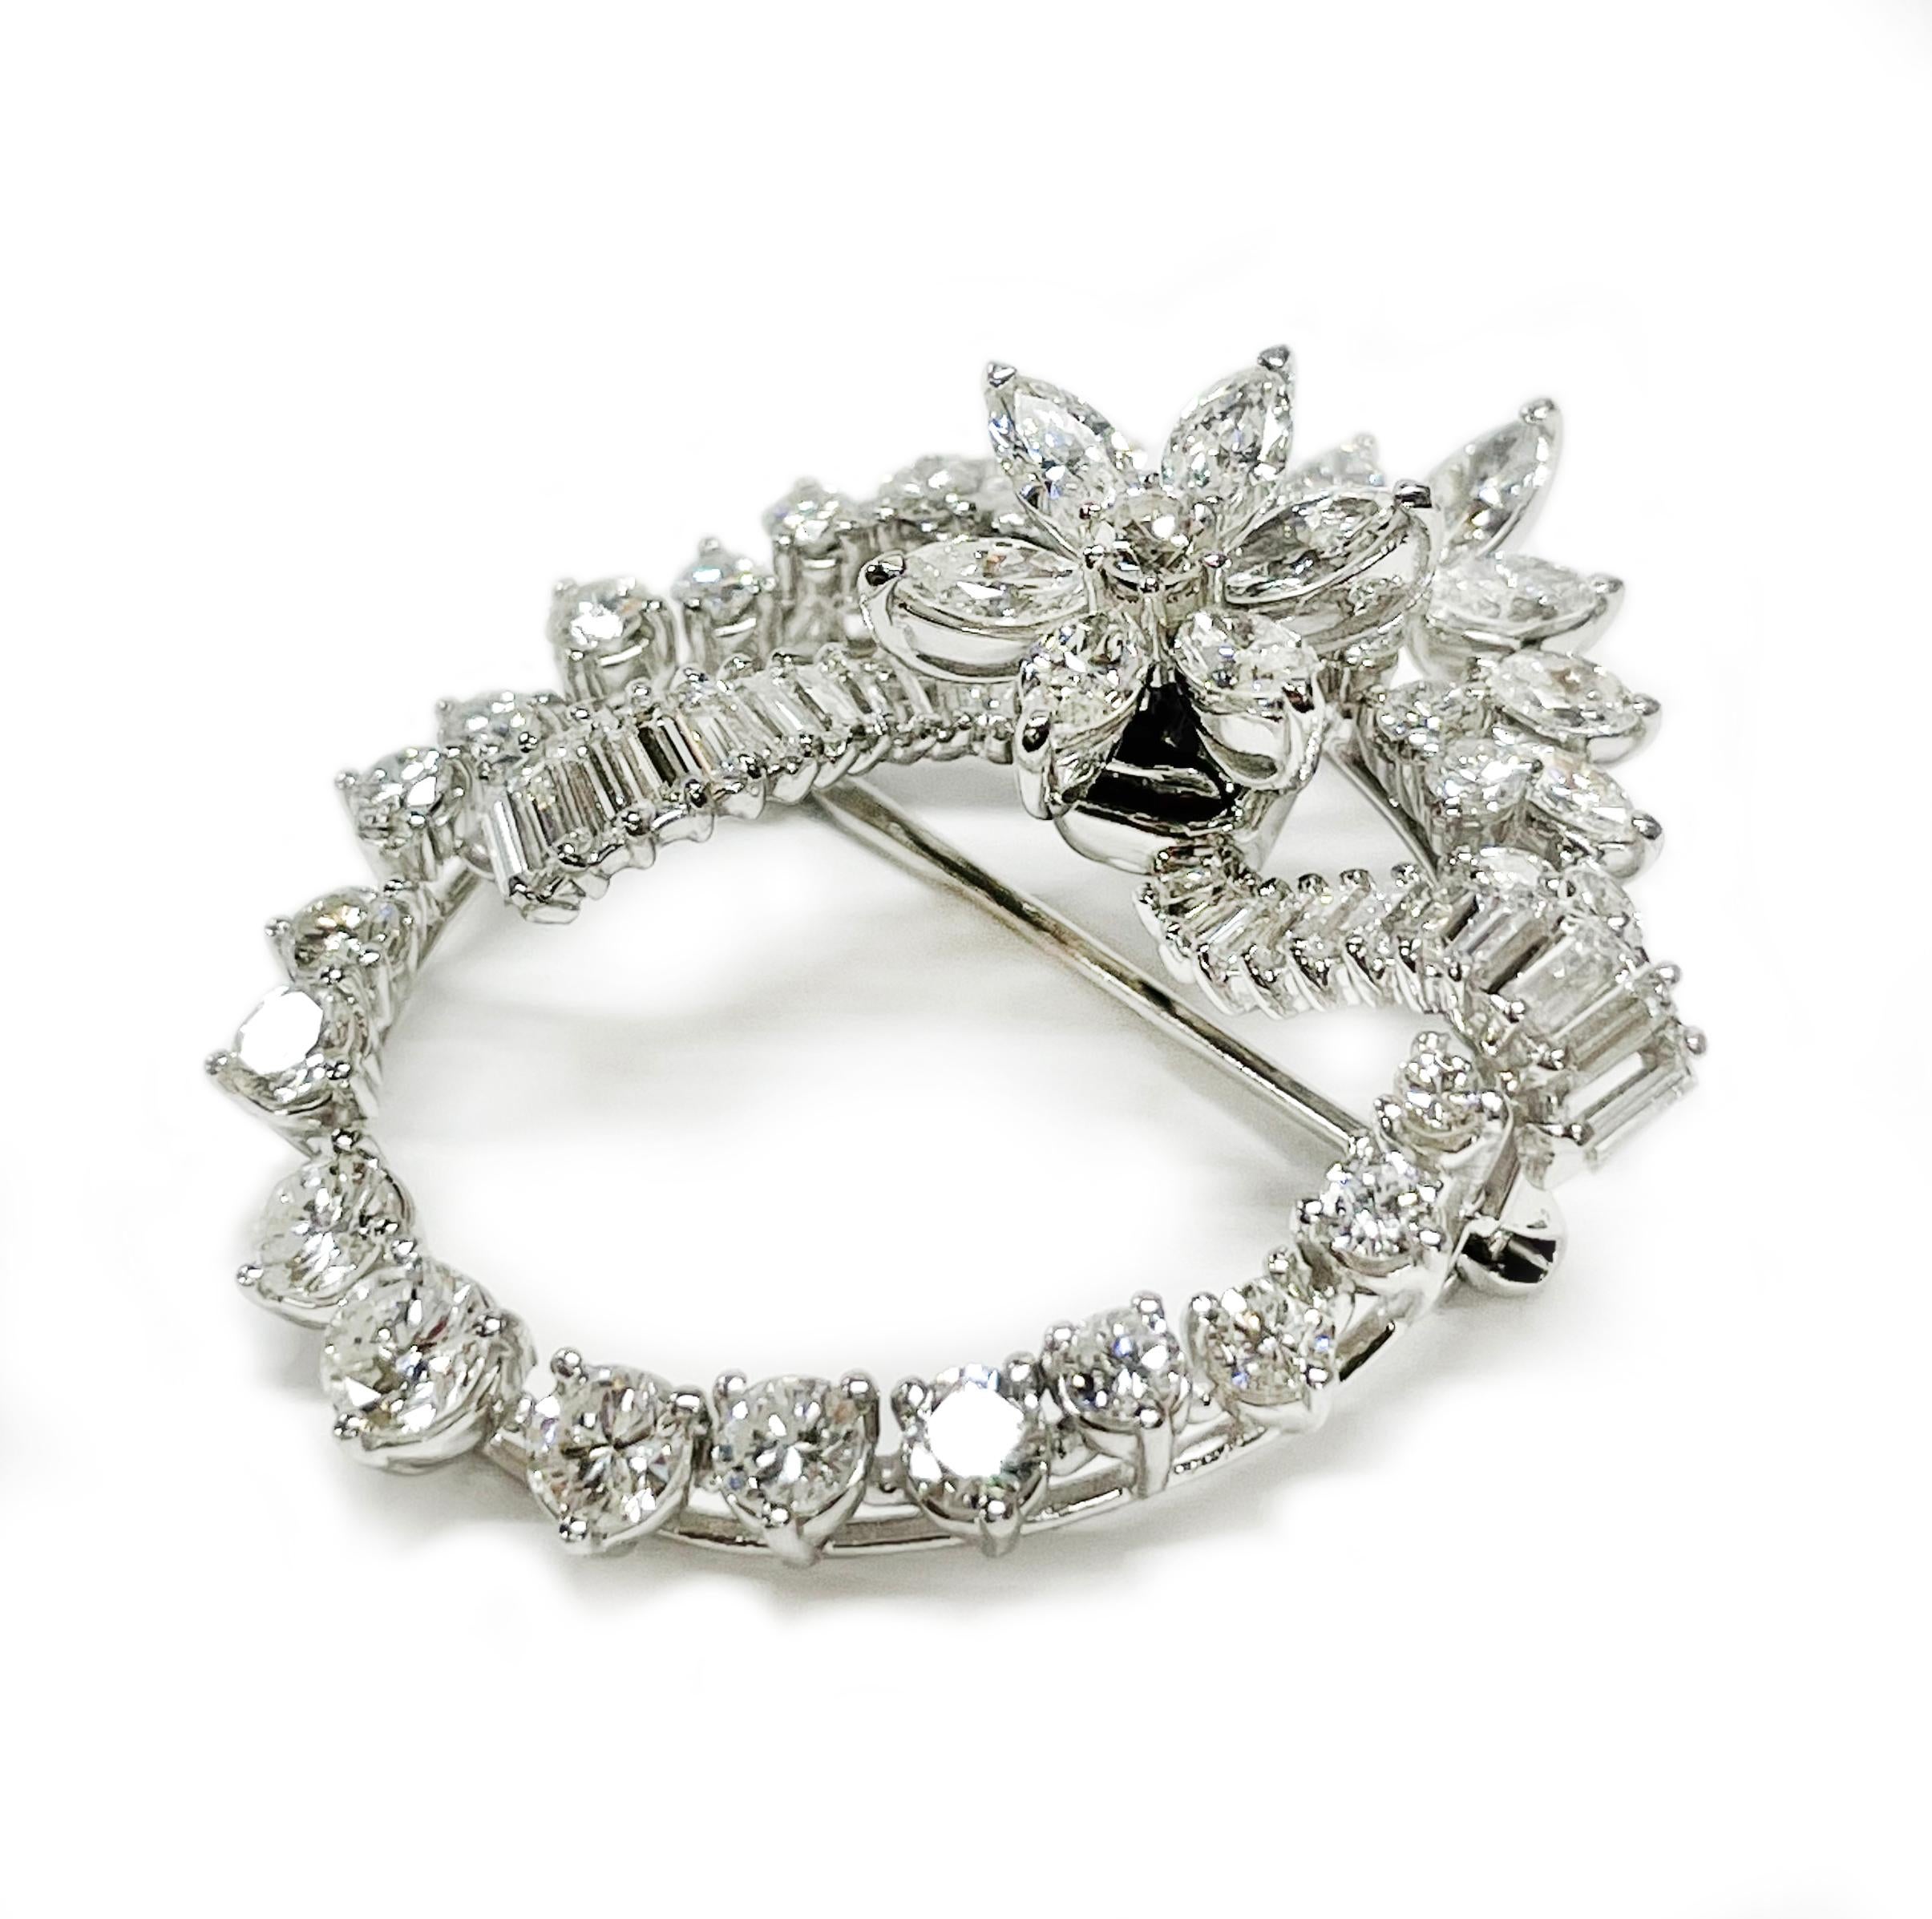 Tested Platinum Diamond Spring Movement Flower Brooch. This is an absolutely gorgeous brooch with an oval platinum frame and prong-set round diamonds, marquise diamonds are set above the oval resembling a crown, the baguettes are set graduate in a